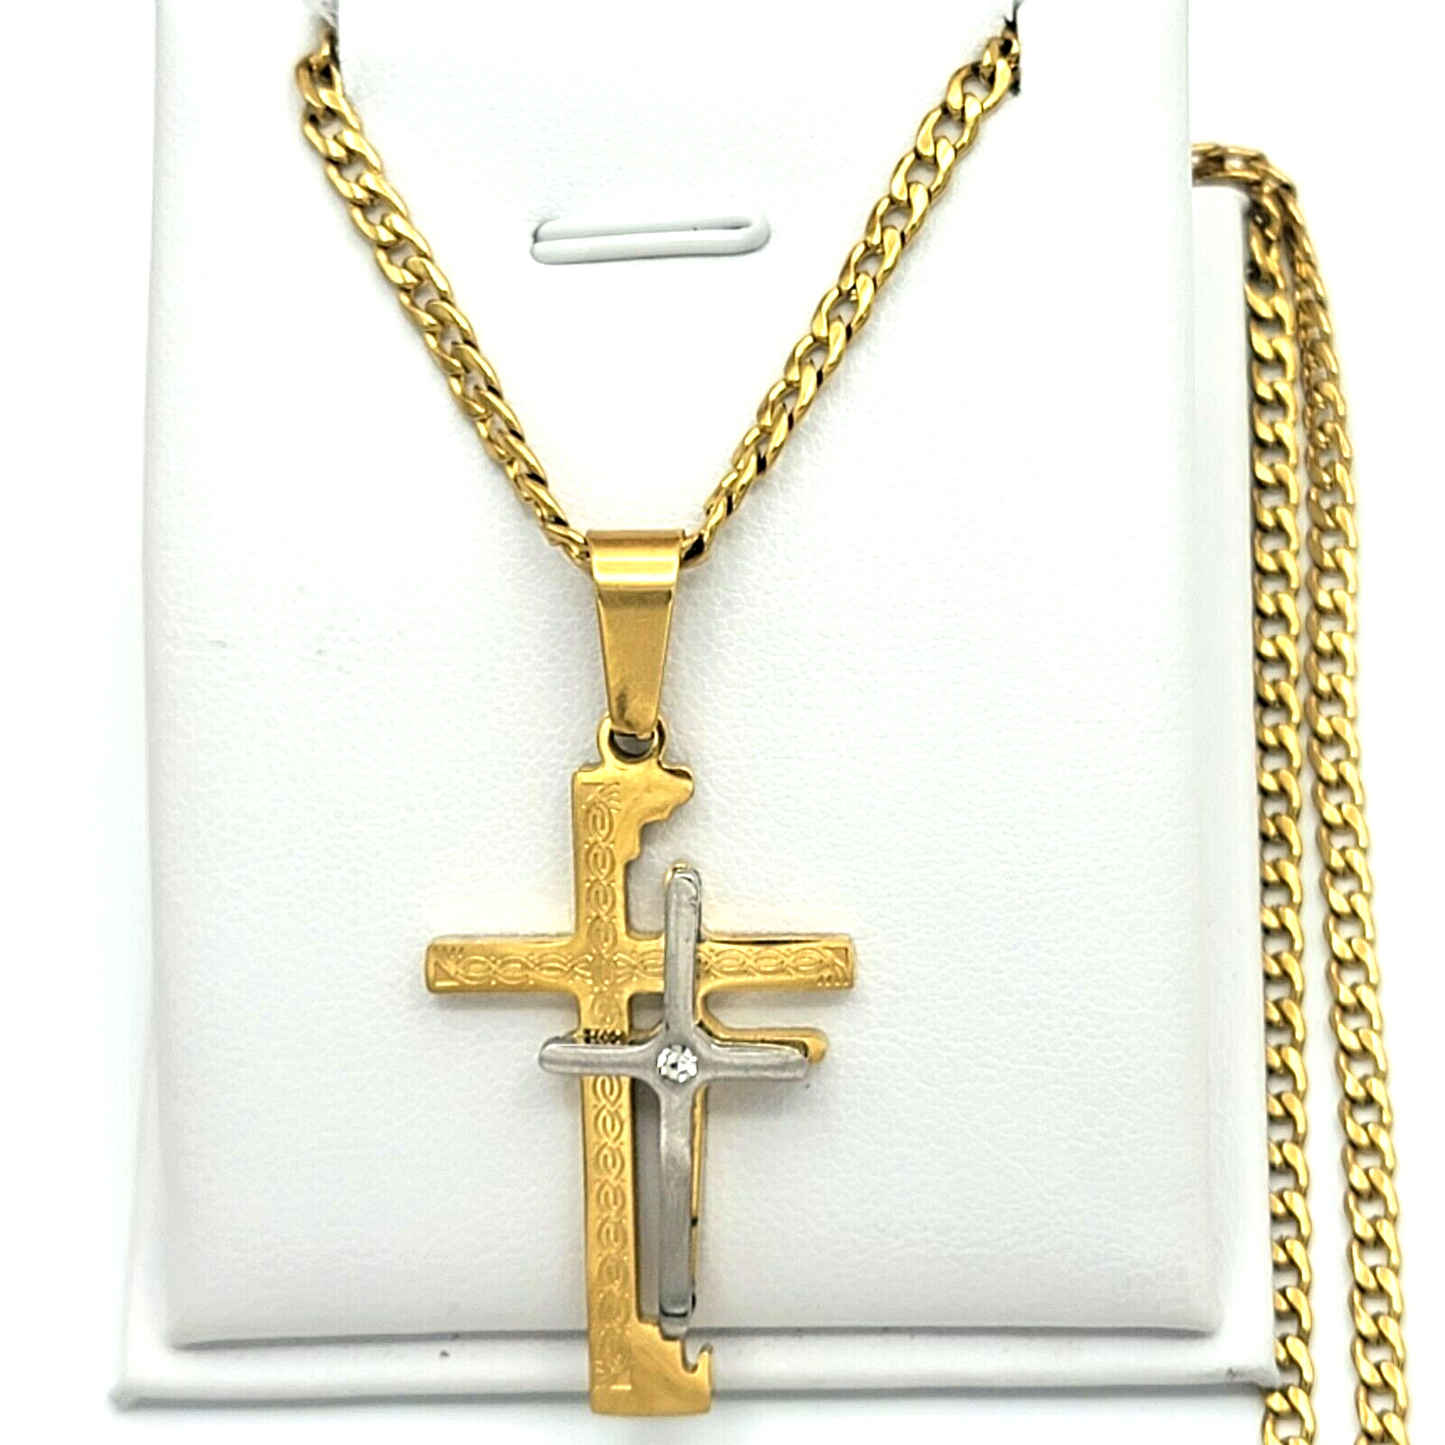 Necklaces - Stainless Steel Gold Plated. Cross Pendant & Chain. Double Cross Silver Gold